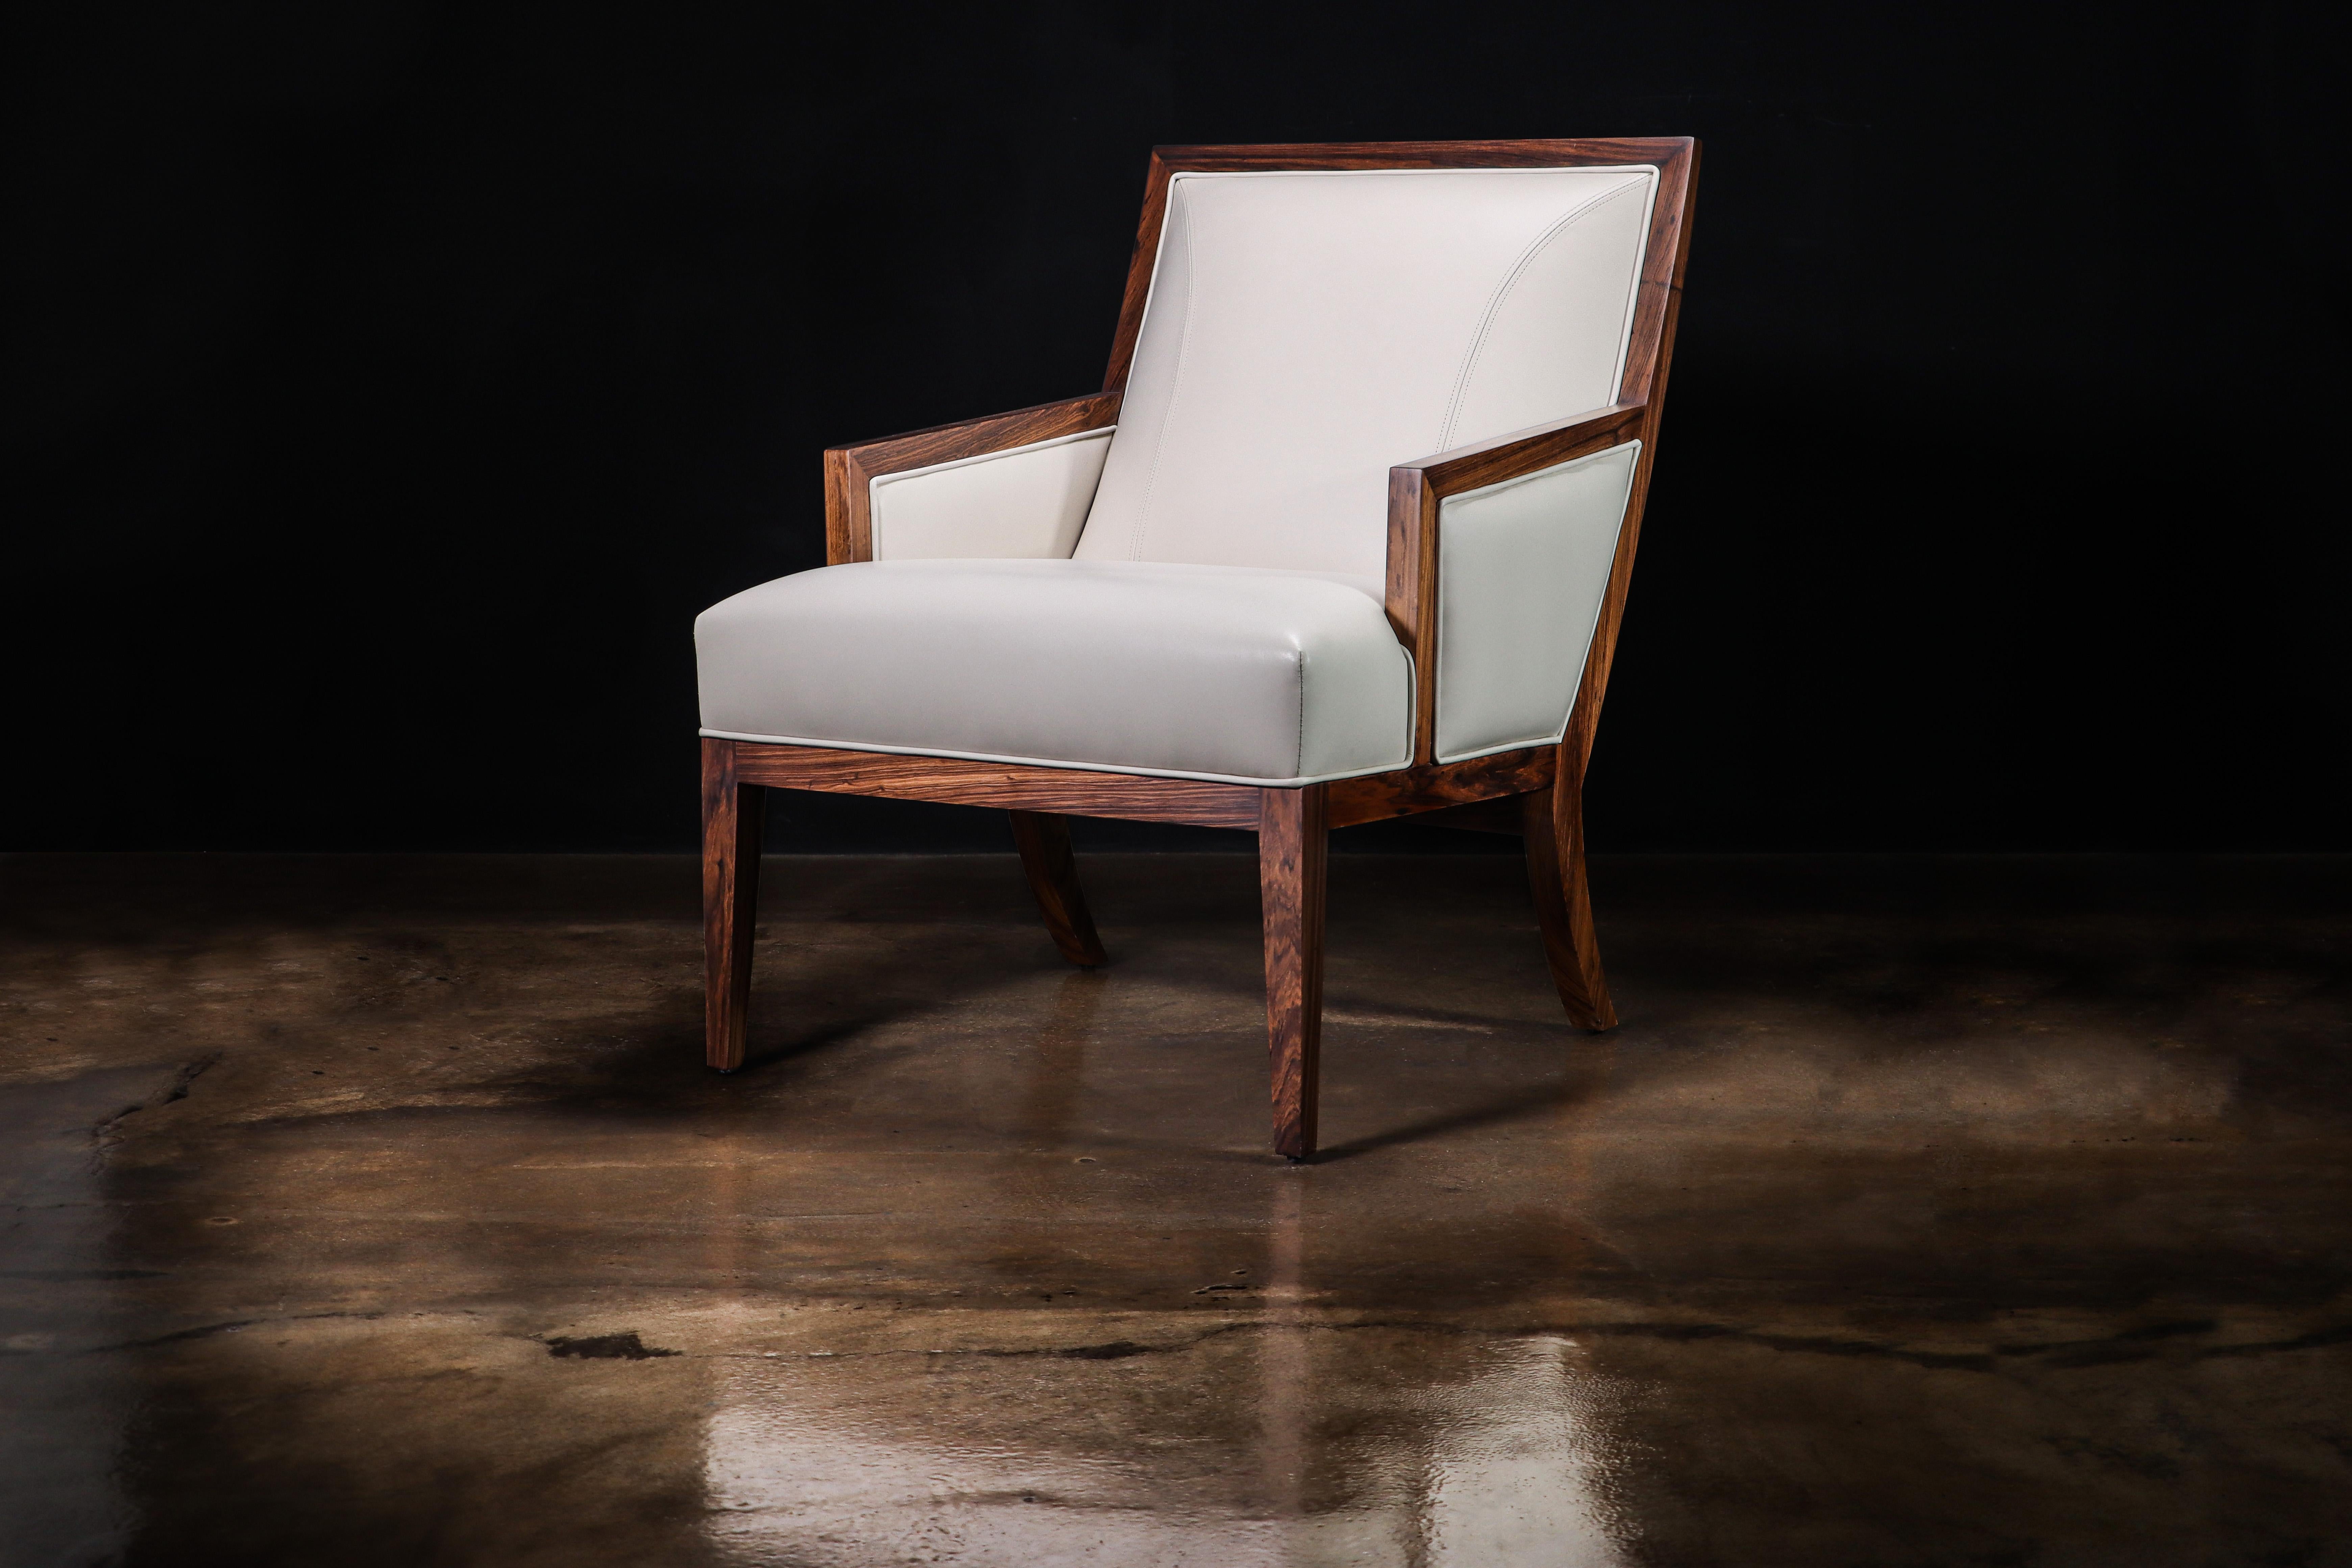 Belgrano Contemporary Lounge Chair in Wood and White Leather from Costantini

Measurements are: 27” W x 35” D x 36” H x 18” SH

The Belgrano Lounge Chair is inspired by mid-20th century modernist design. It features a decorative stich detail